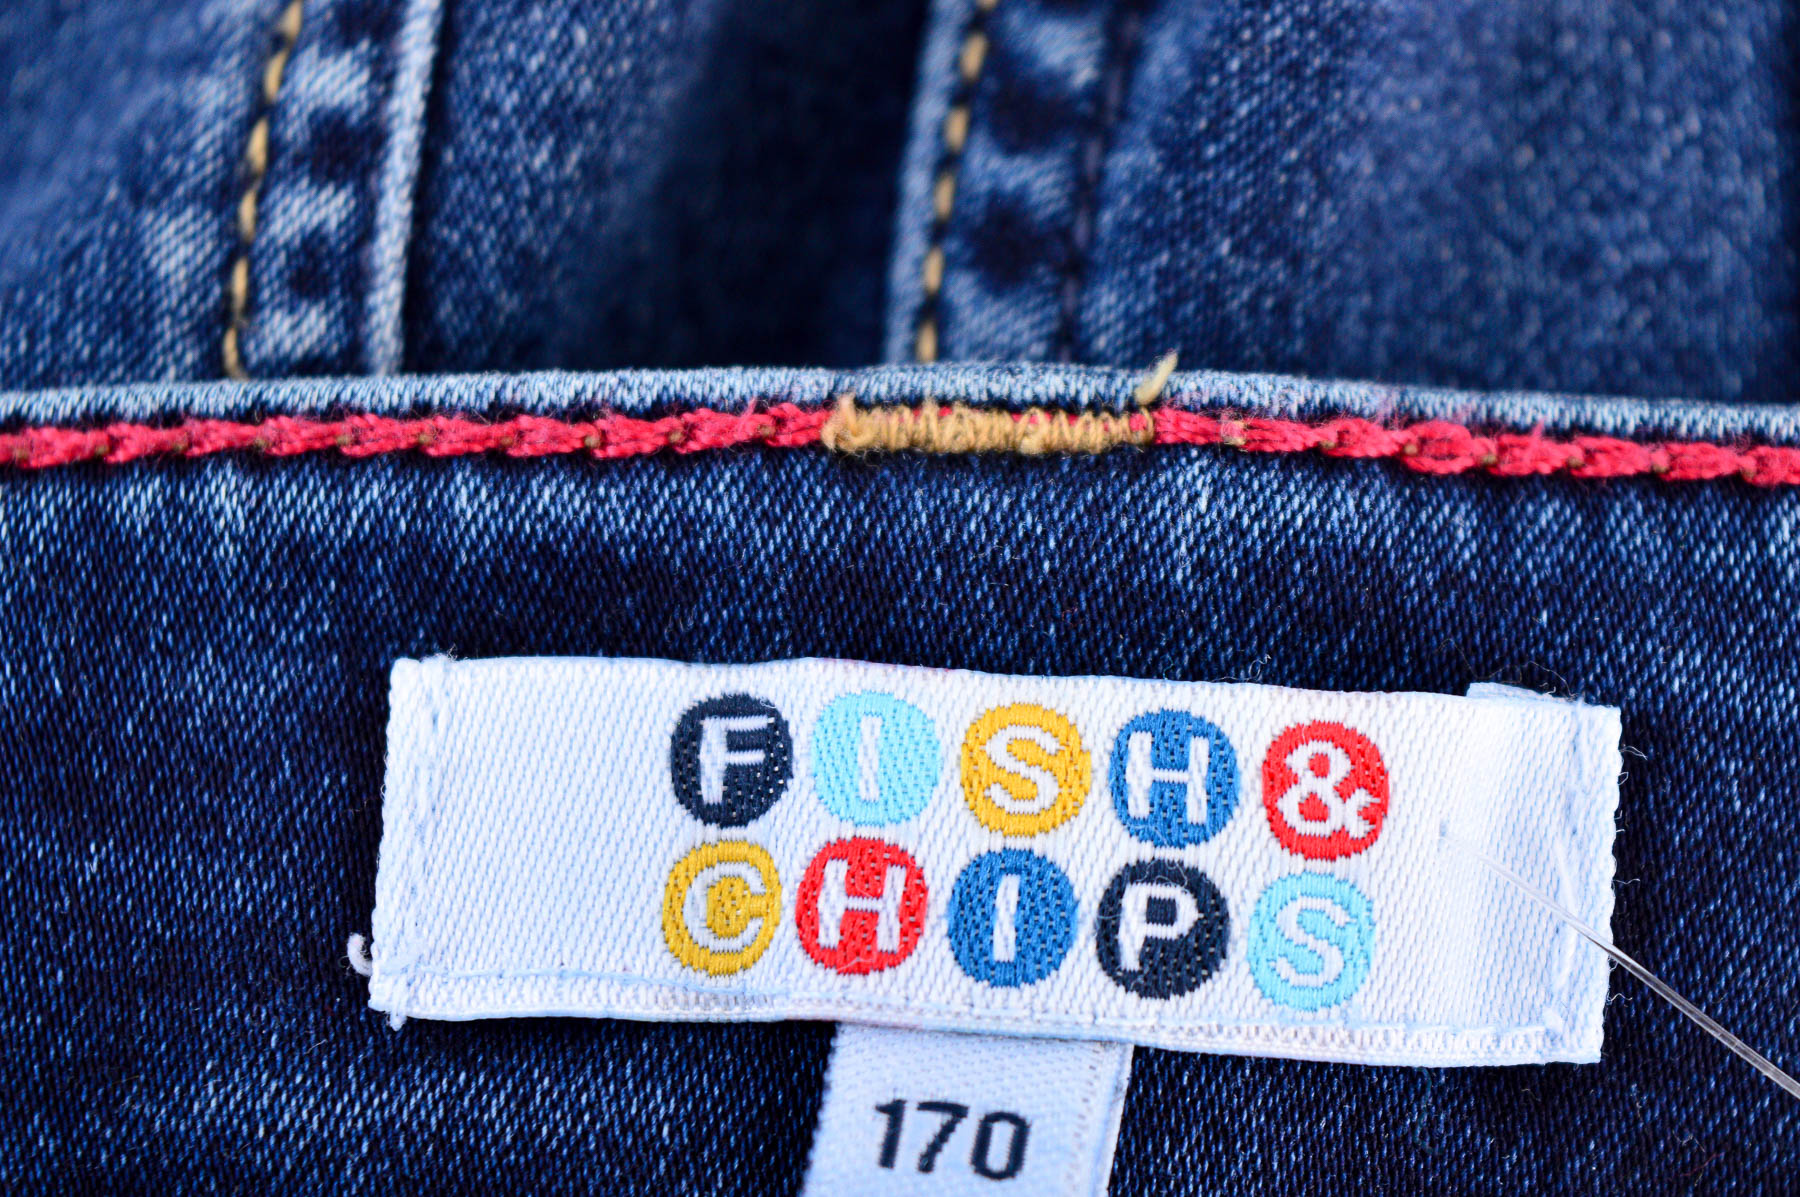 Girl's jeans - FISH & CHIPS - 2